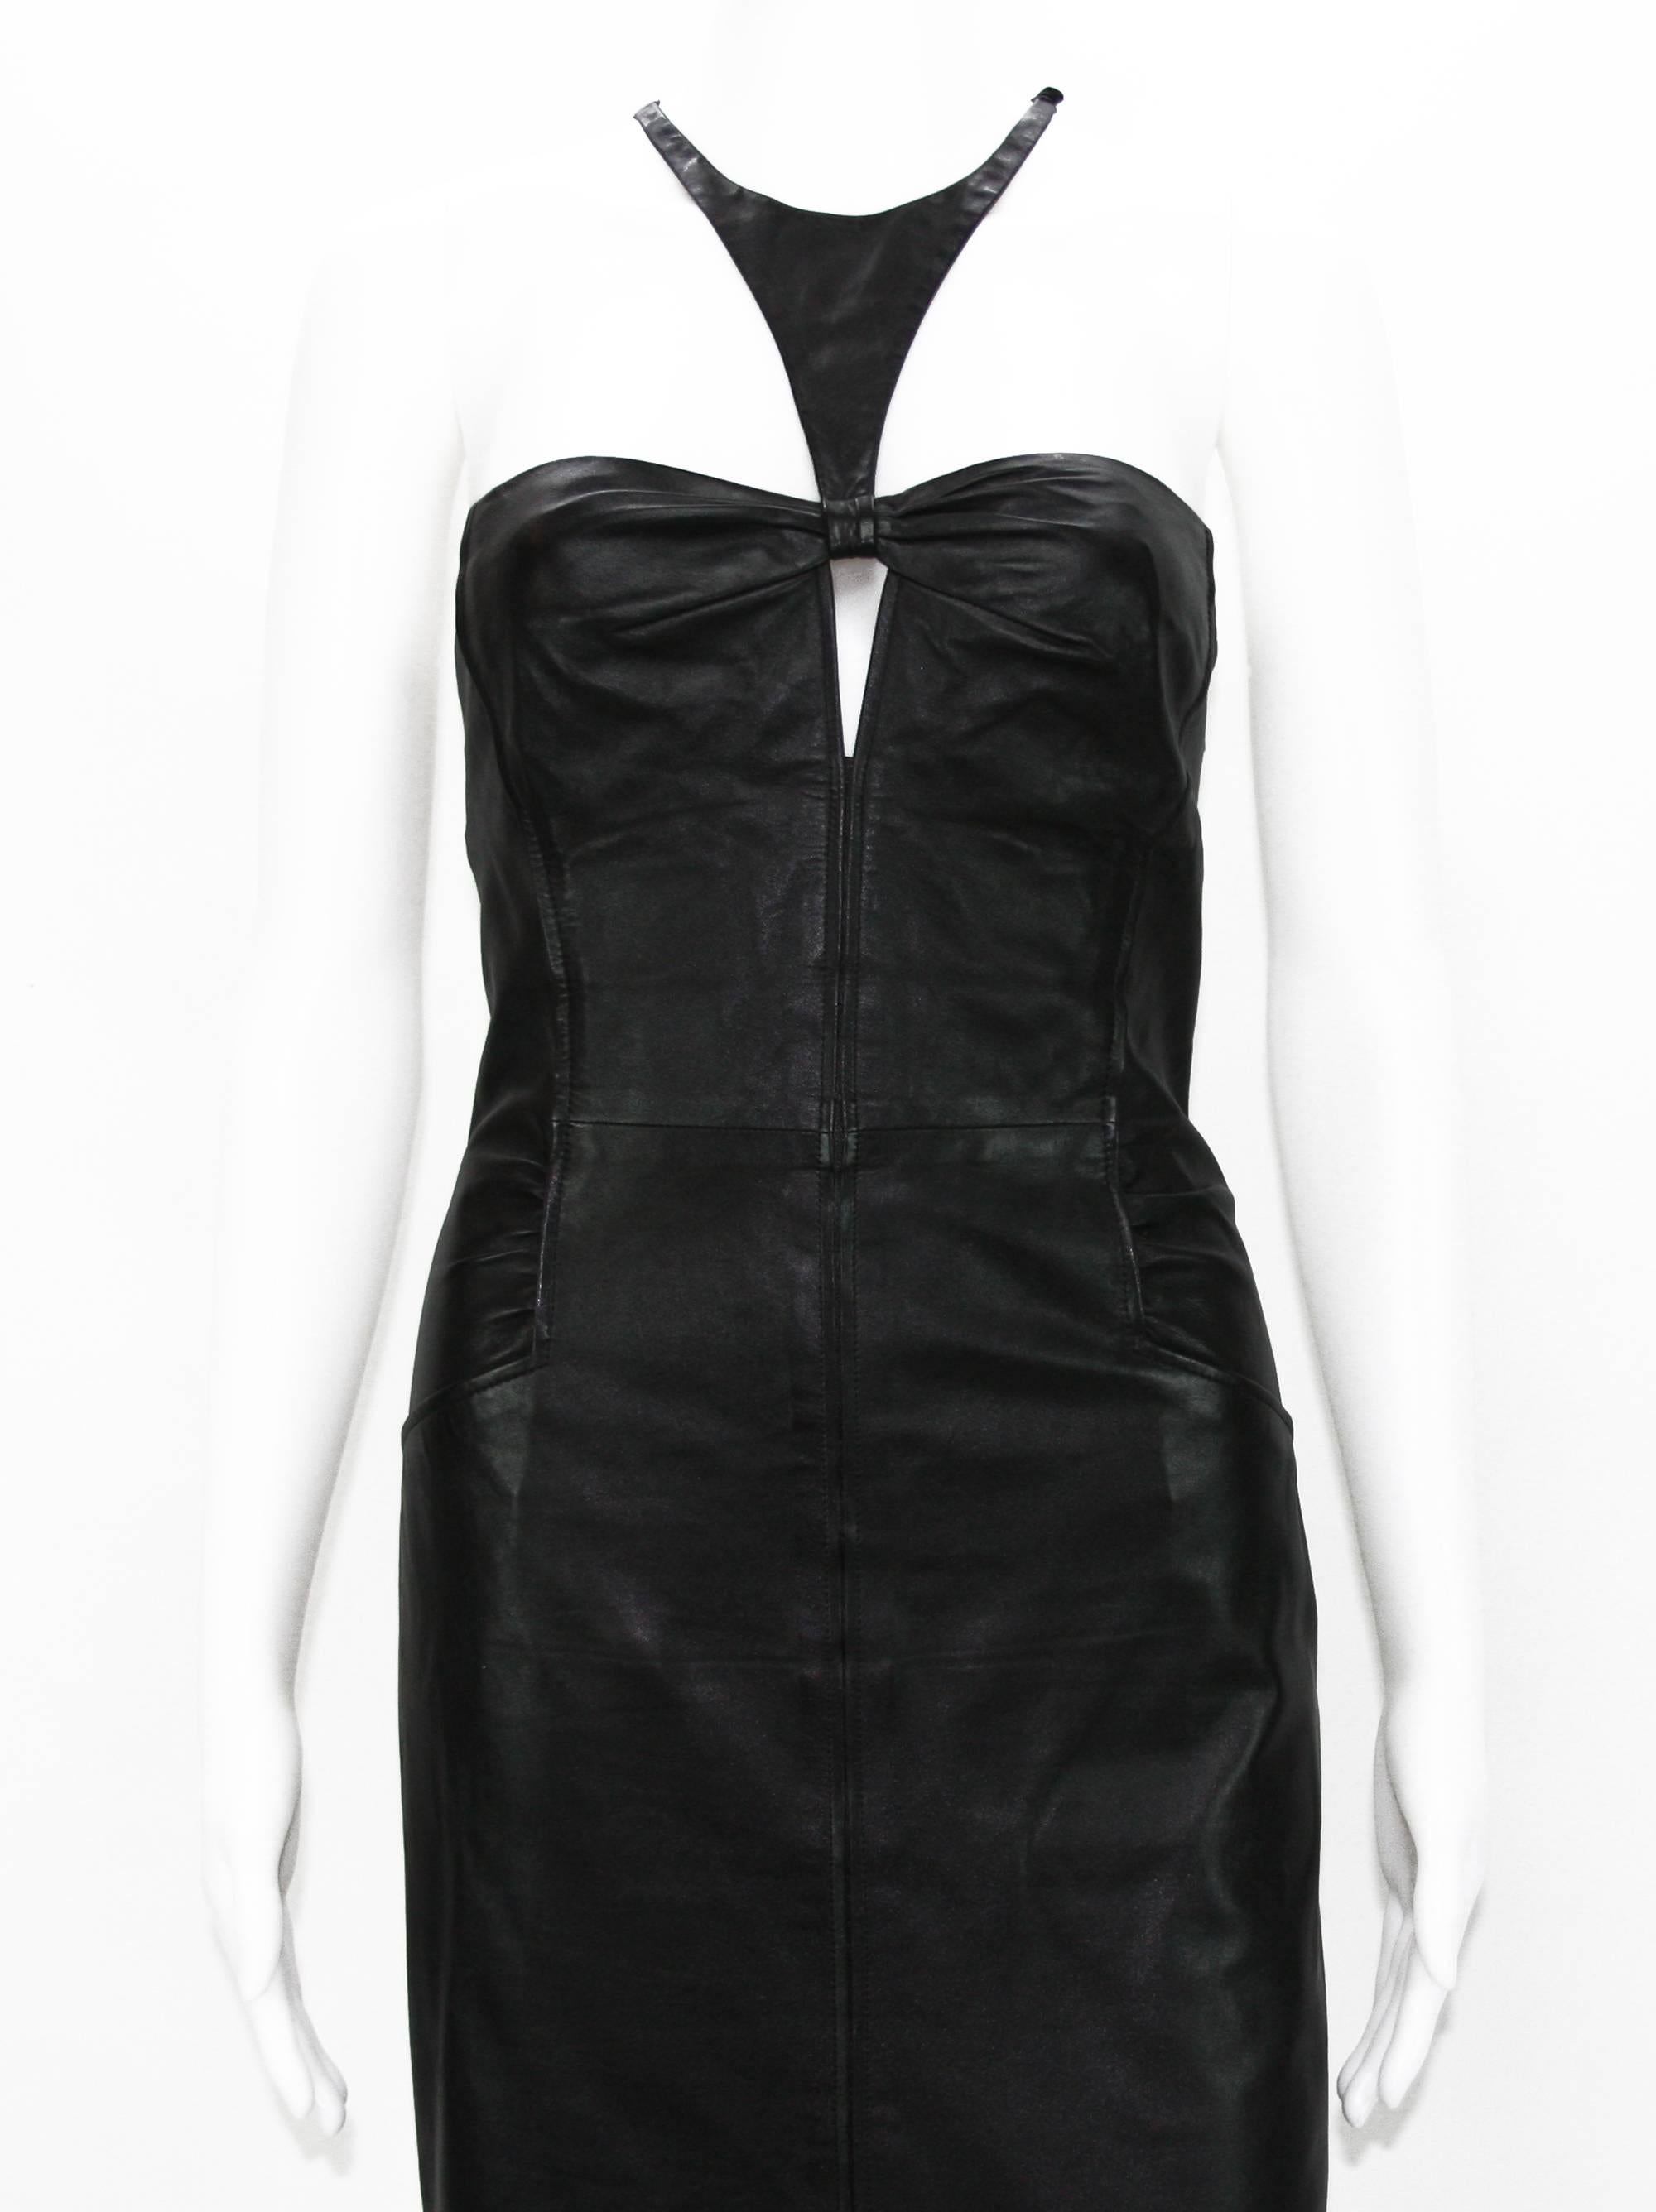 Tom Ford for Gucci 2004 Collection Black Leather Cocktail Dress It. 44 - US 8 For Sale 5